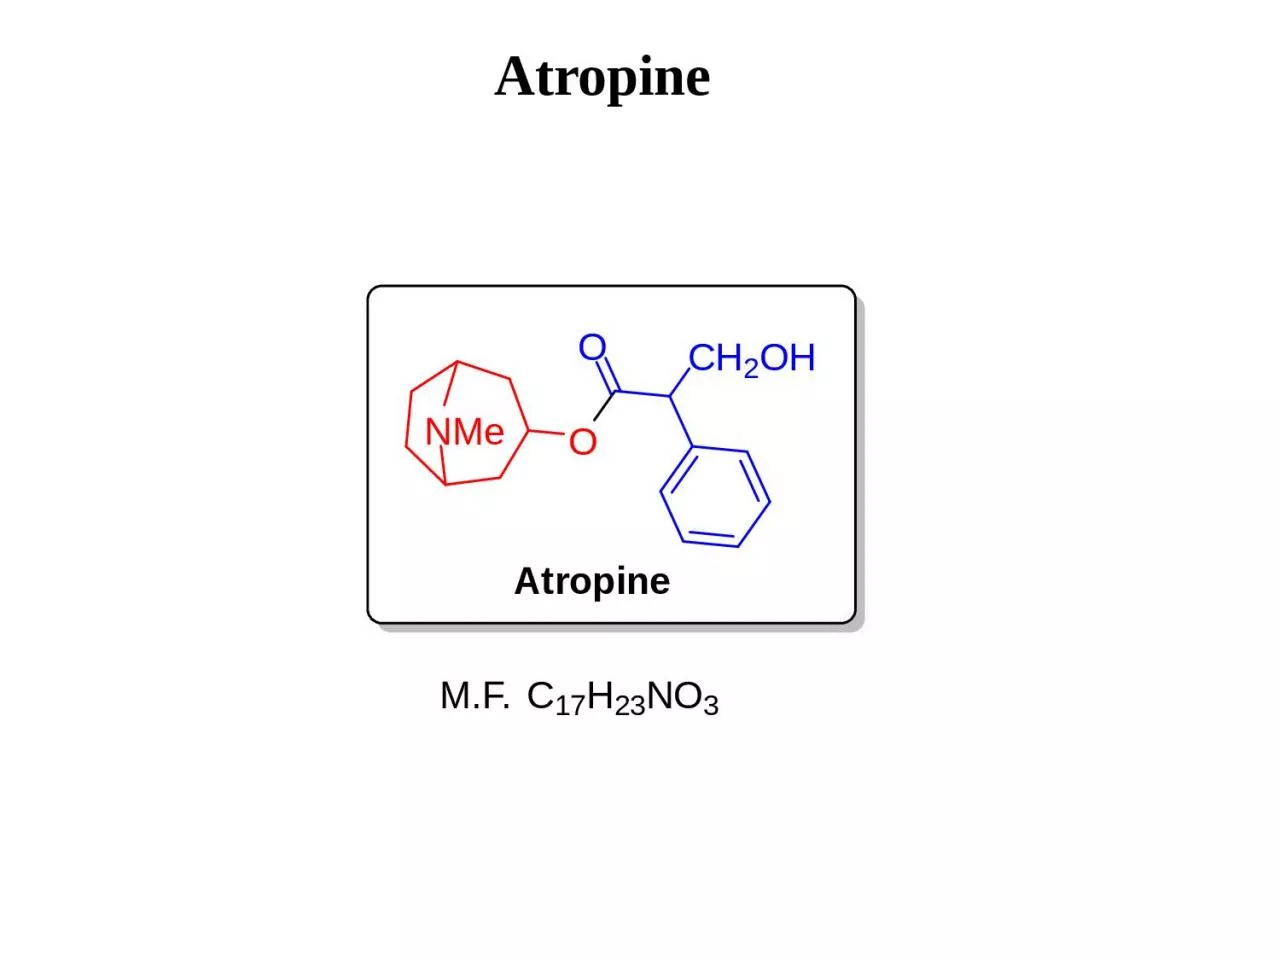 Atropine Nature of linkage could be amide or ester!!!